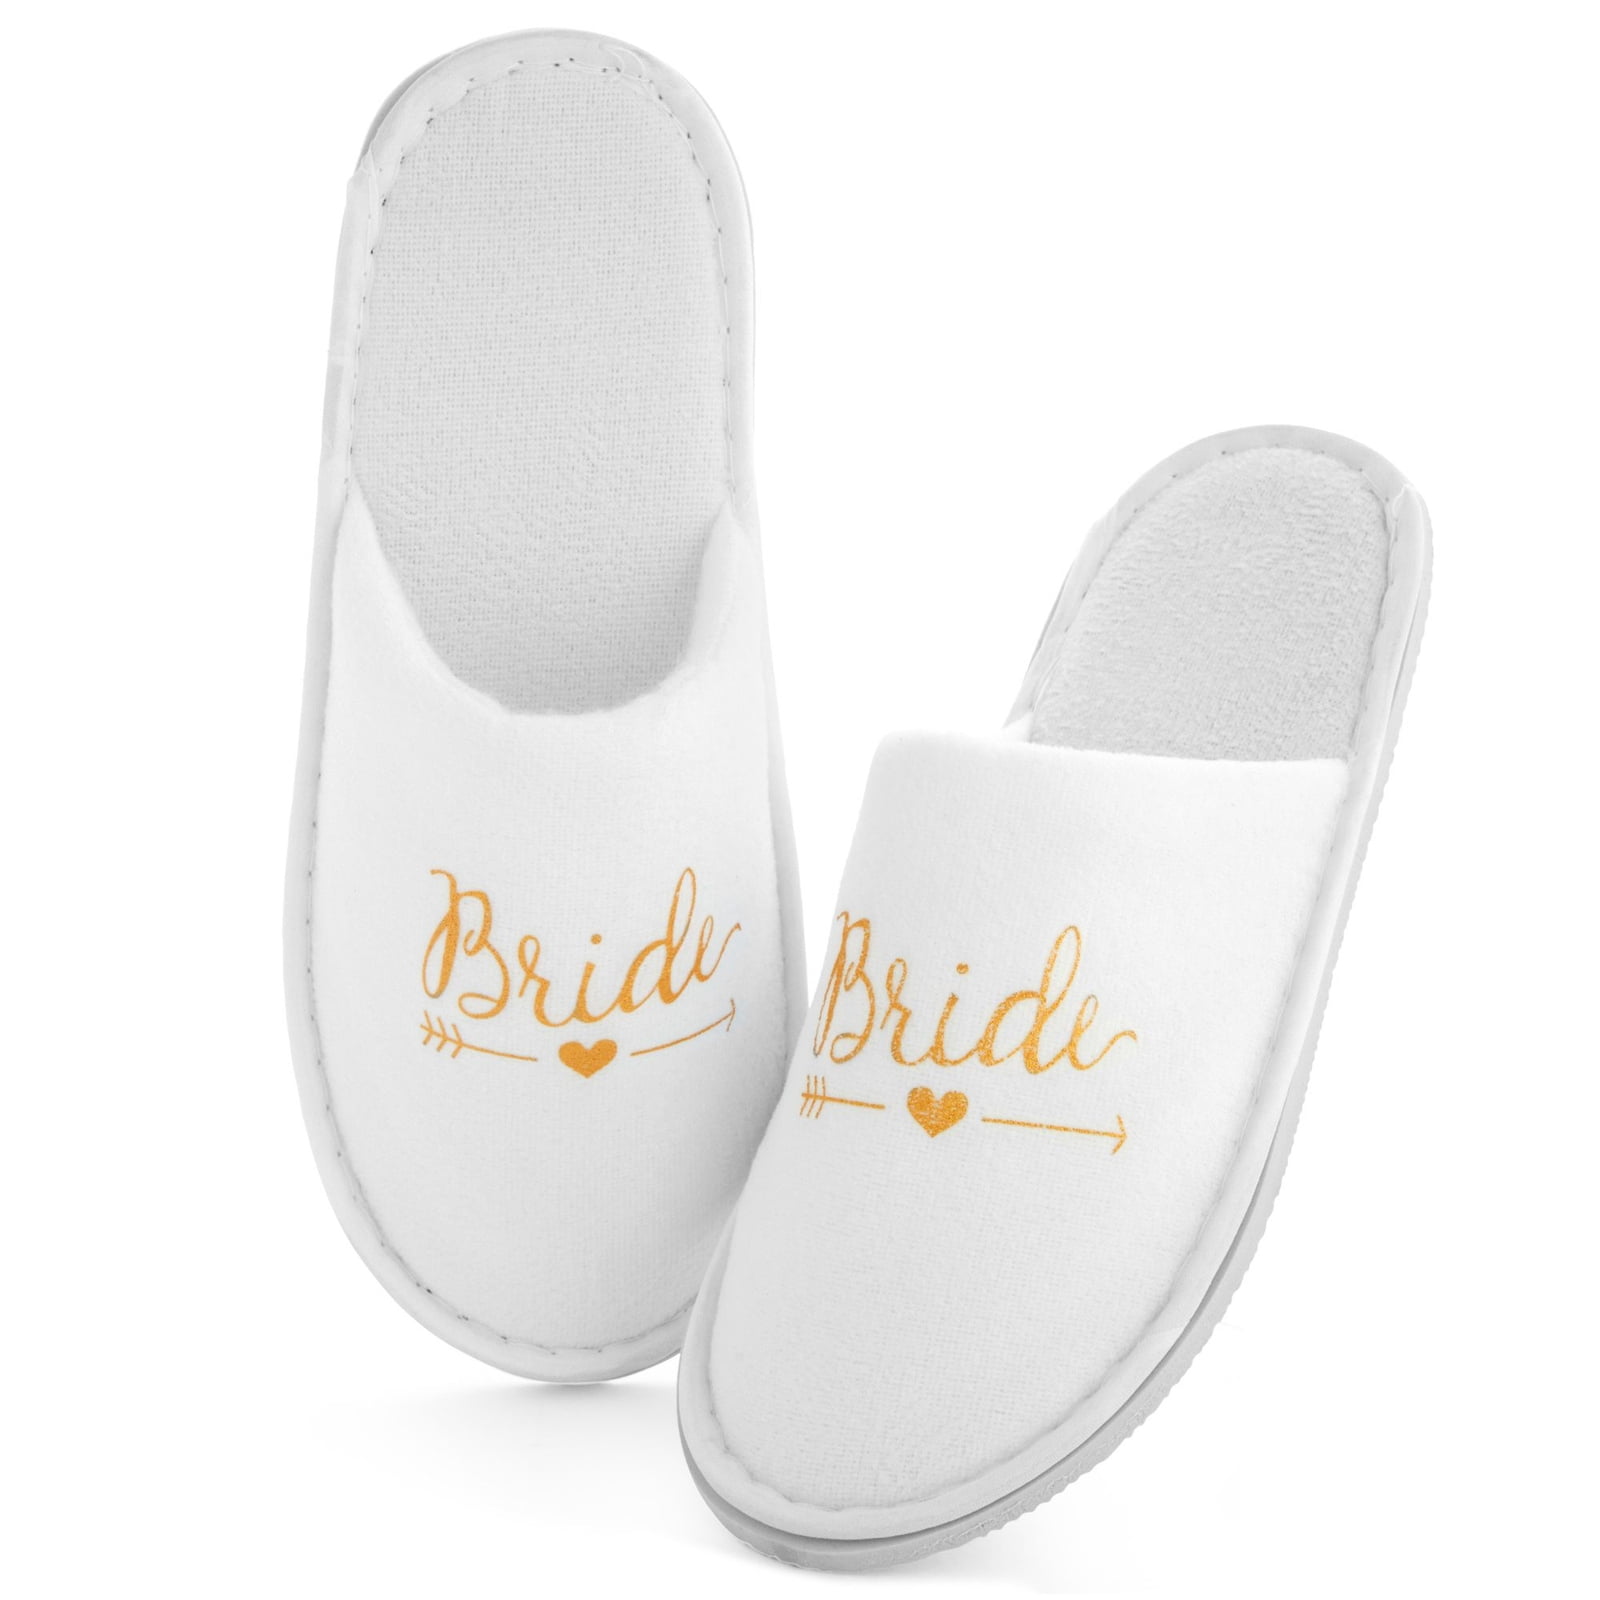 5 Wedding Slippers for Bride to Be, Bridesmaid, Bridal Shower Spa Party Gifts, White & Gold - Walmart.com